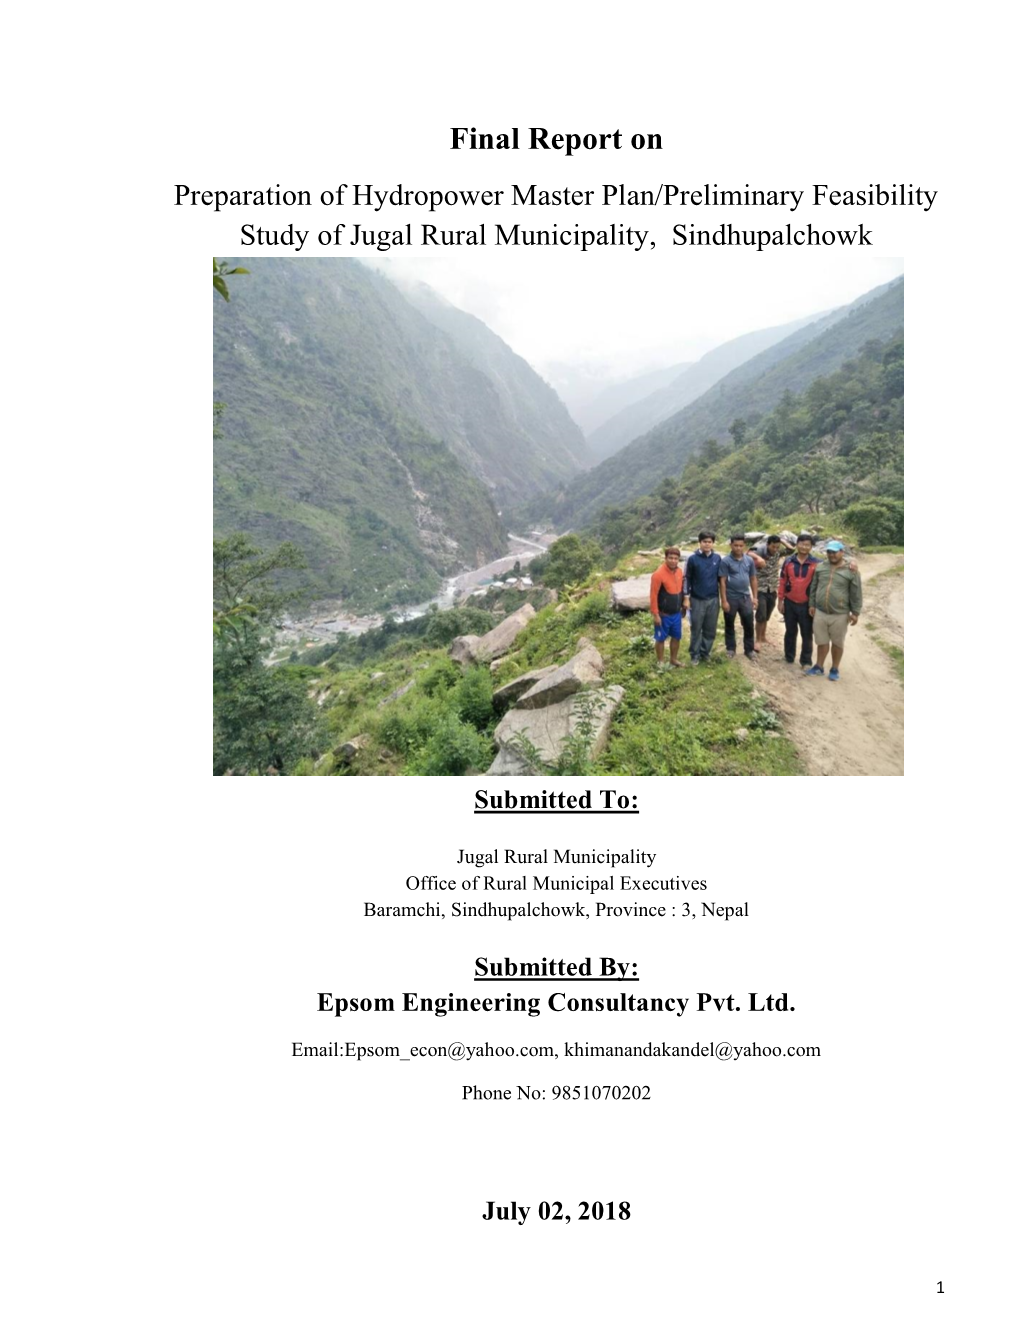 Final Report on Preparation of Hydropower Master Plan/Preliminary Feasibility Study of Jugal Rural Municipality, Sindhupalchowk